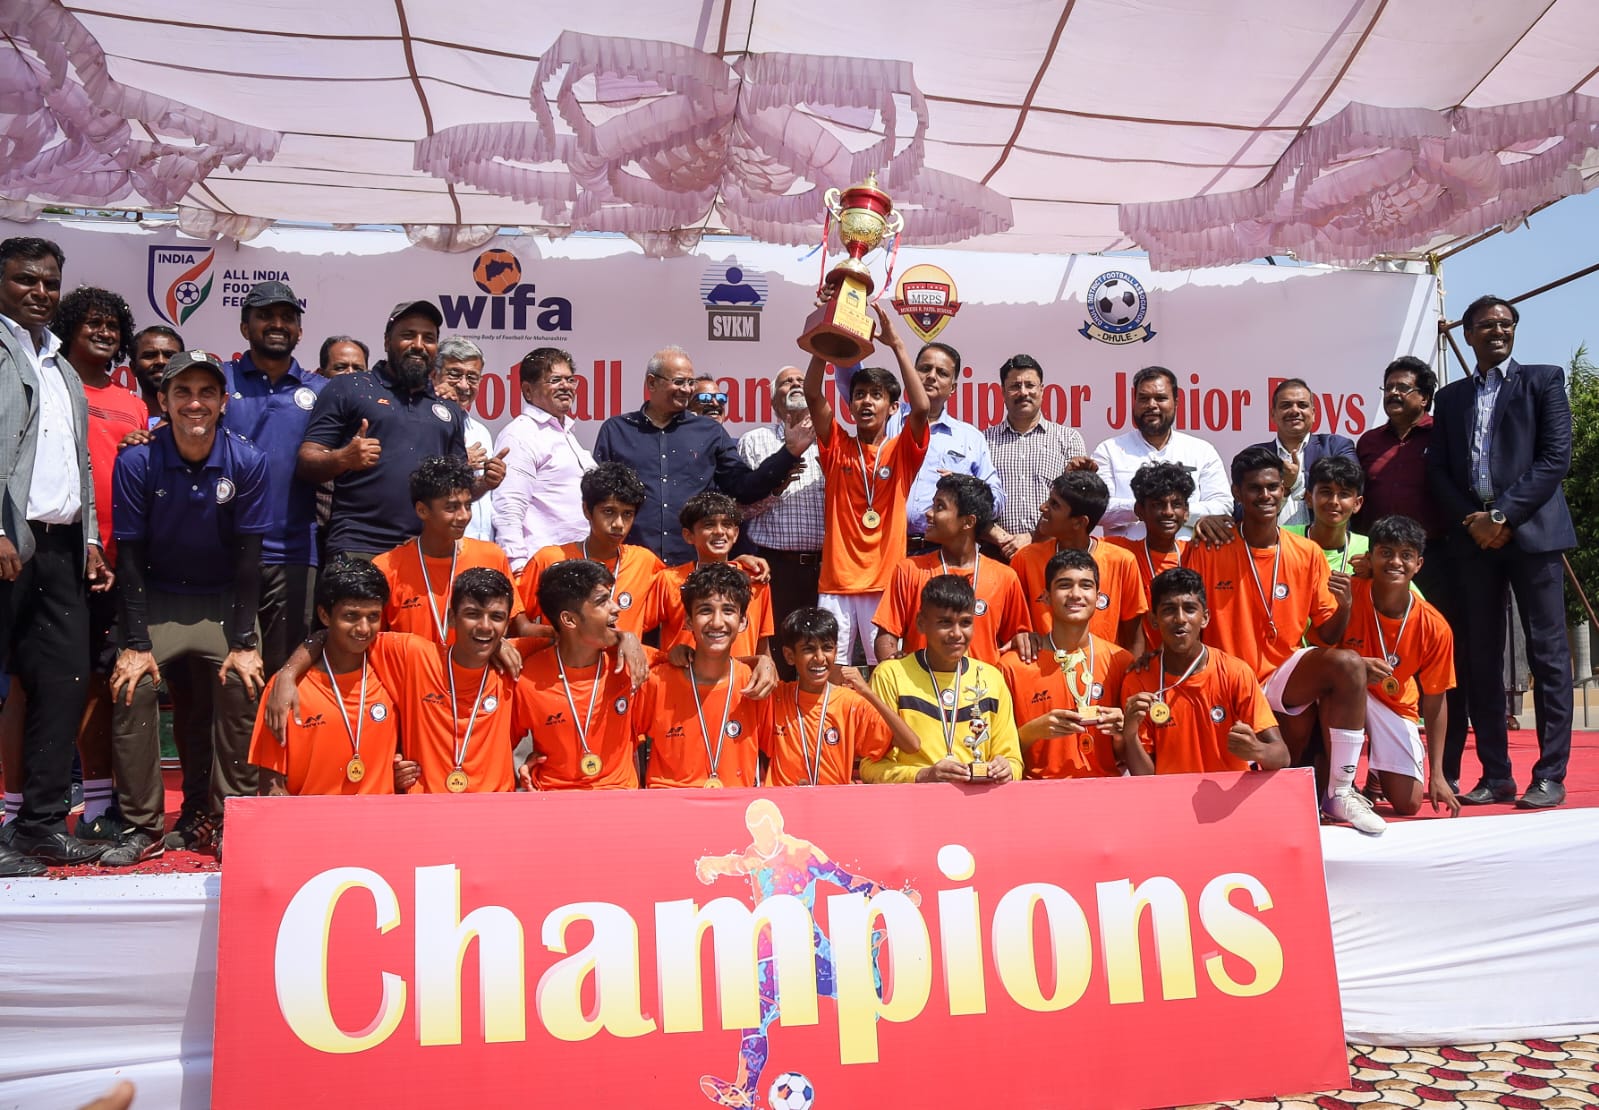 Mumbai Triumphs as Champions in the WIFA Inter District Championship Final